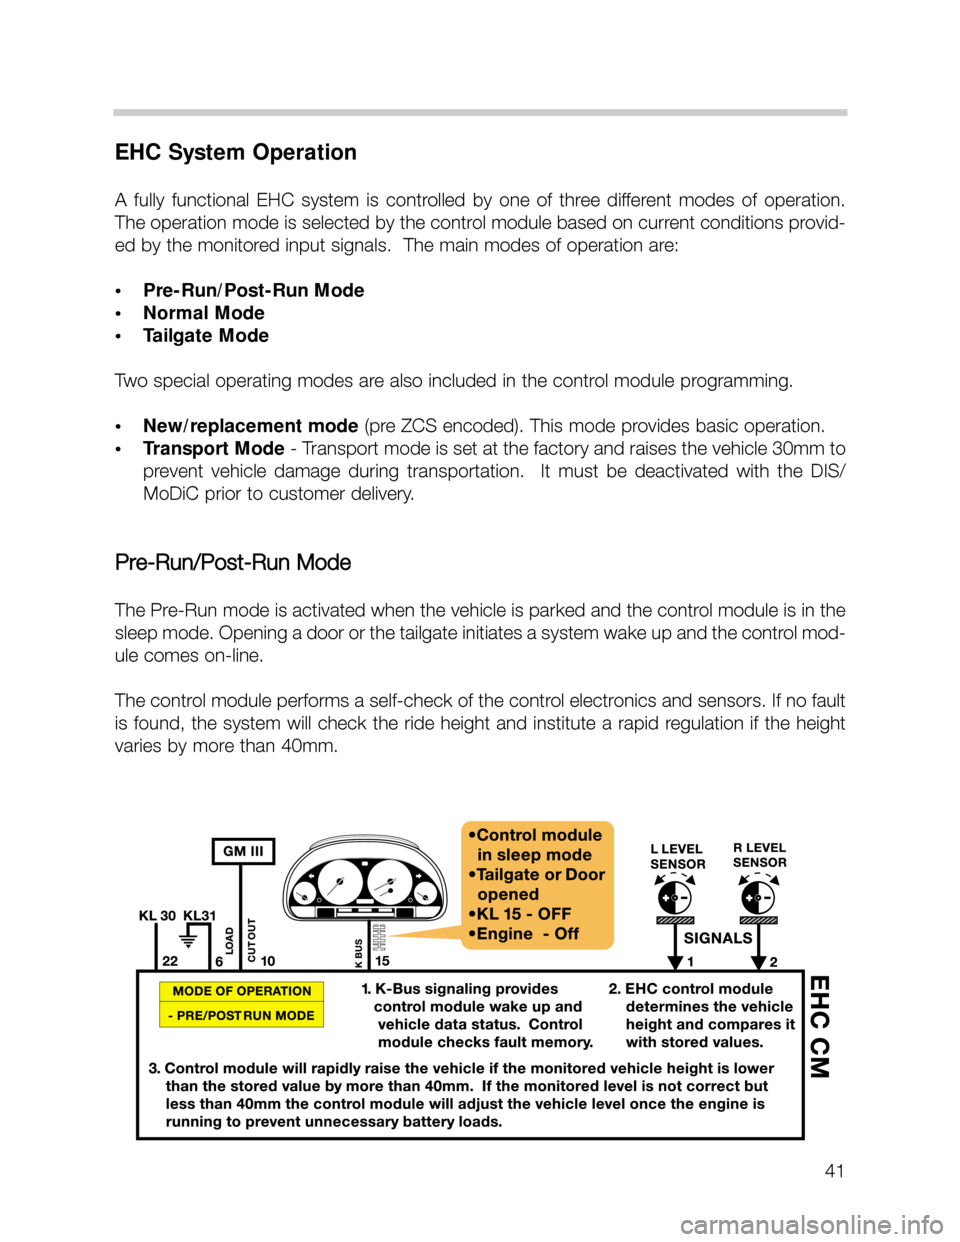 BMW X5 2004 E53 Service Manual 41
EHC System Operation
A  fully  functional  EHC  system  is  controlled  by  one  of  three  different  modes  of  operation.
The operation mode is selected by the control module based on current co